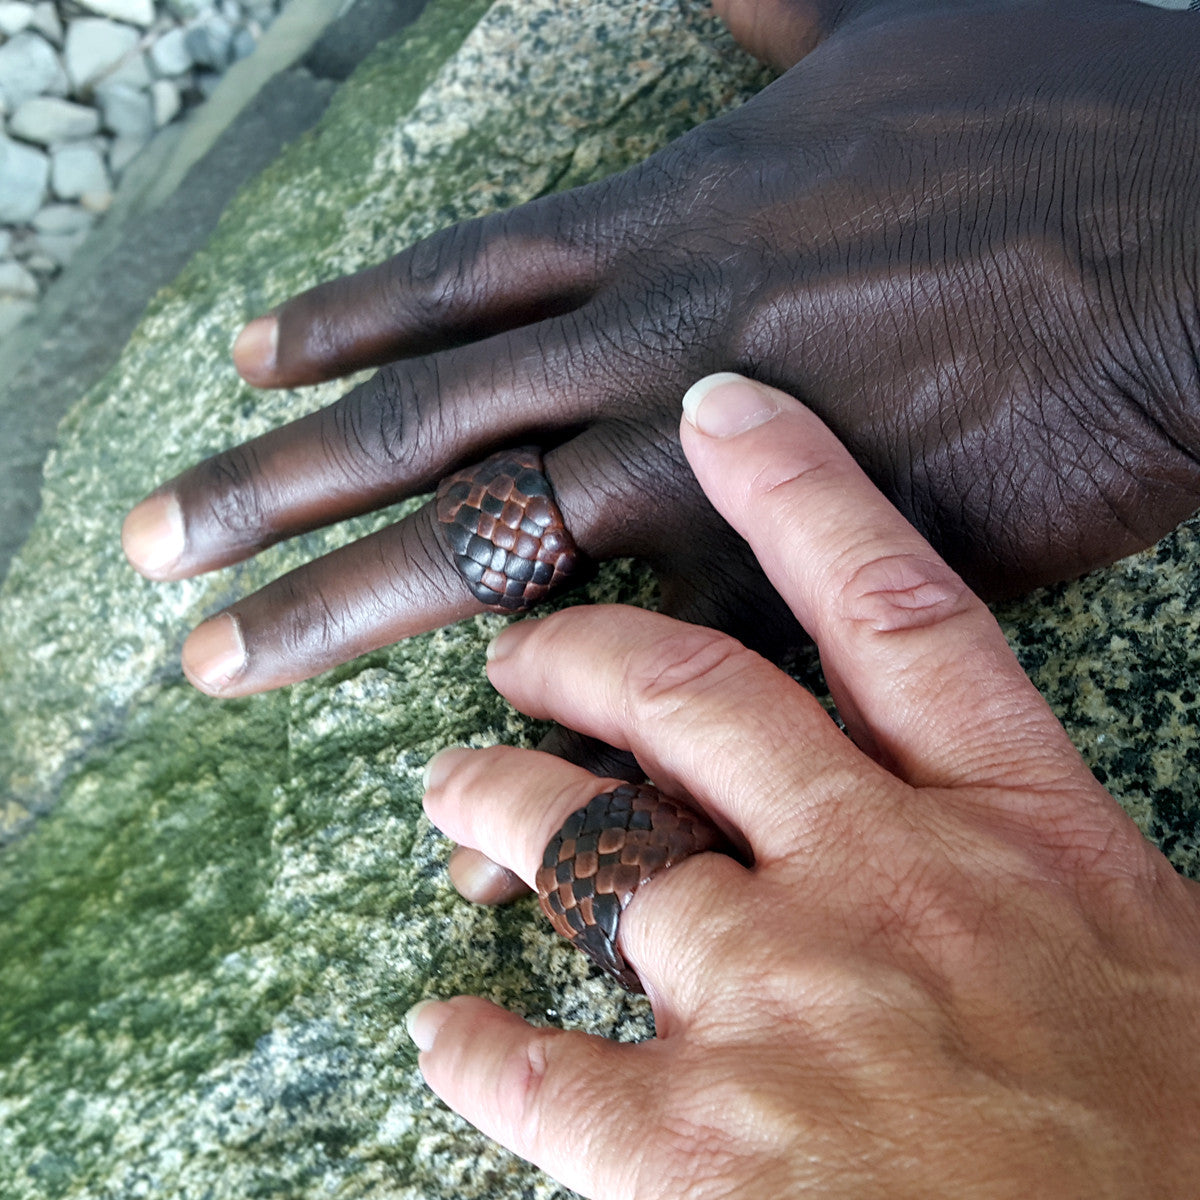 Men's Women's Braided Leather Rings on male and female hands